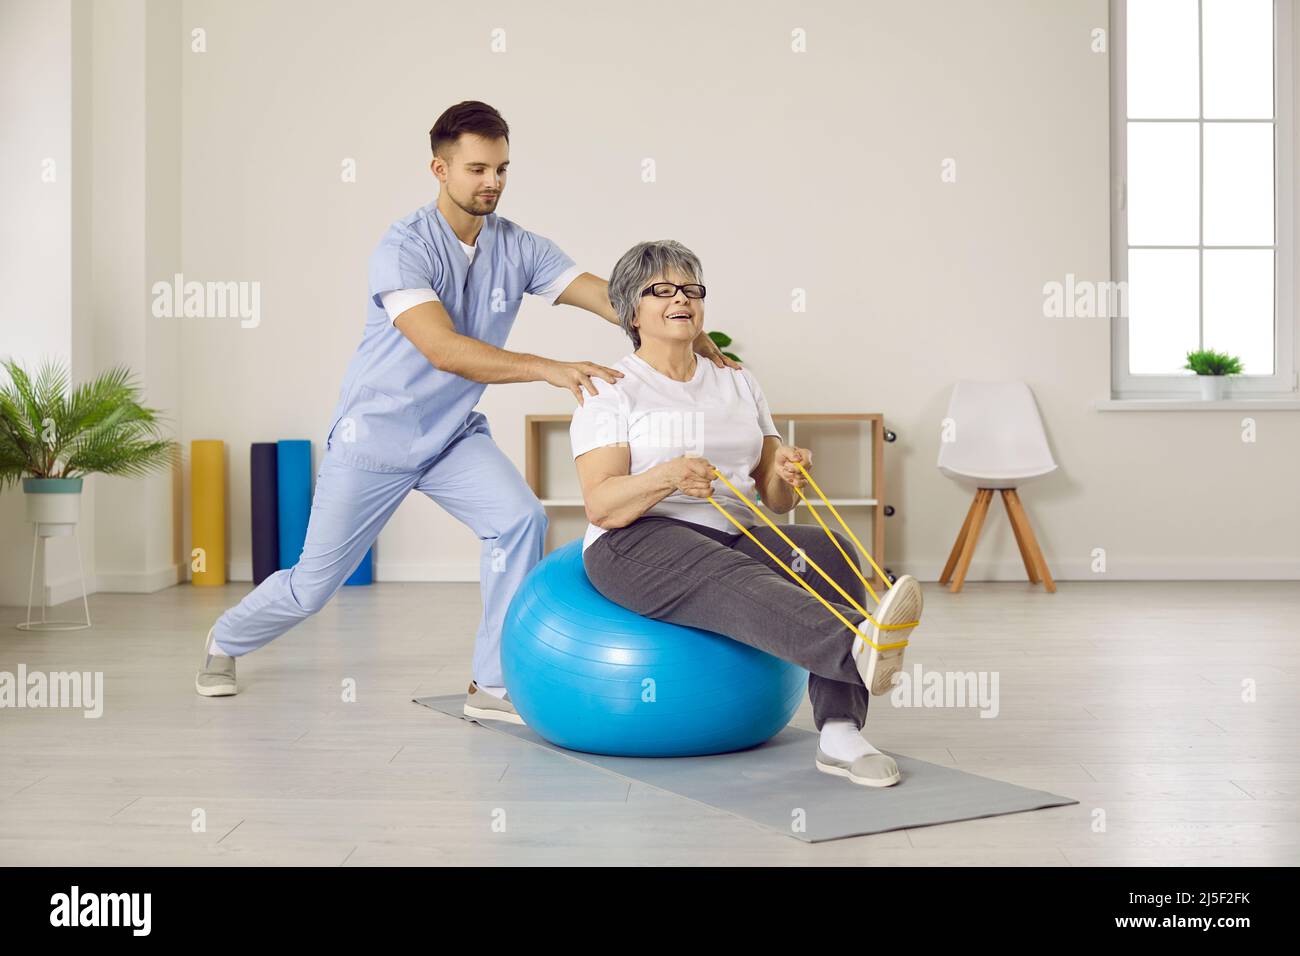 Physiotherapist help mature woman patient with recovery Stock Photo